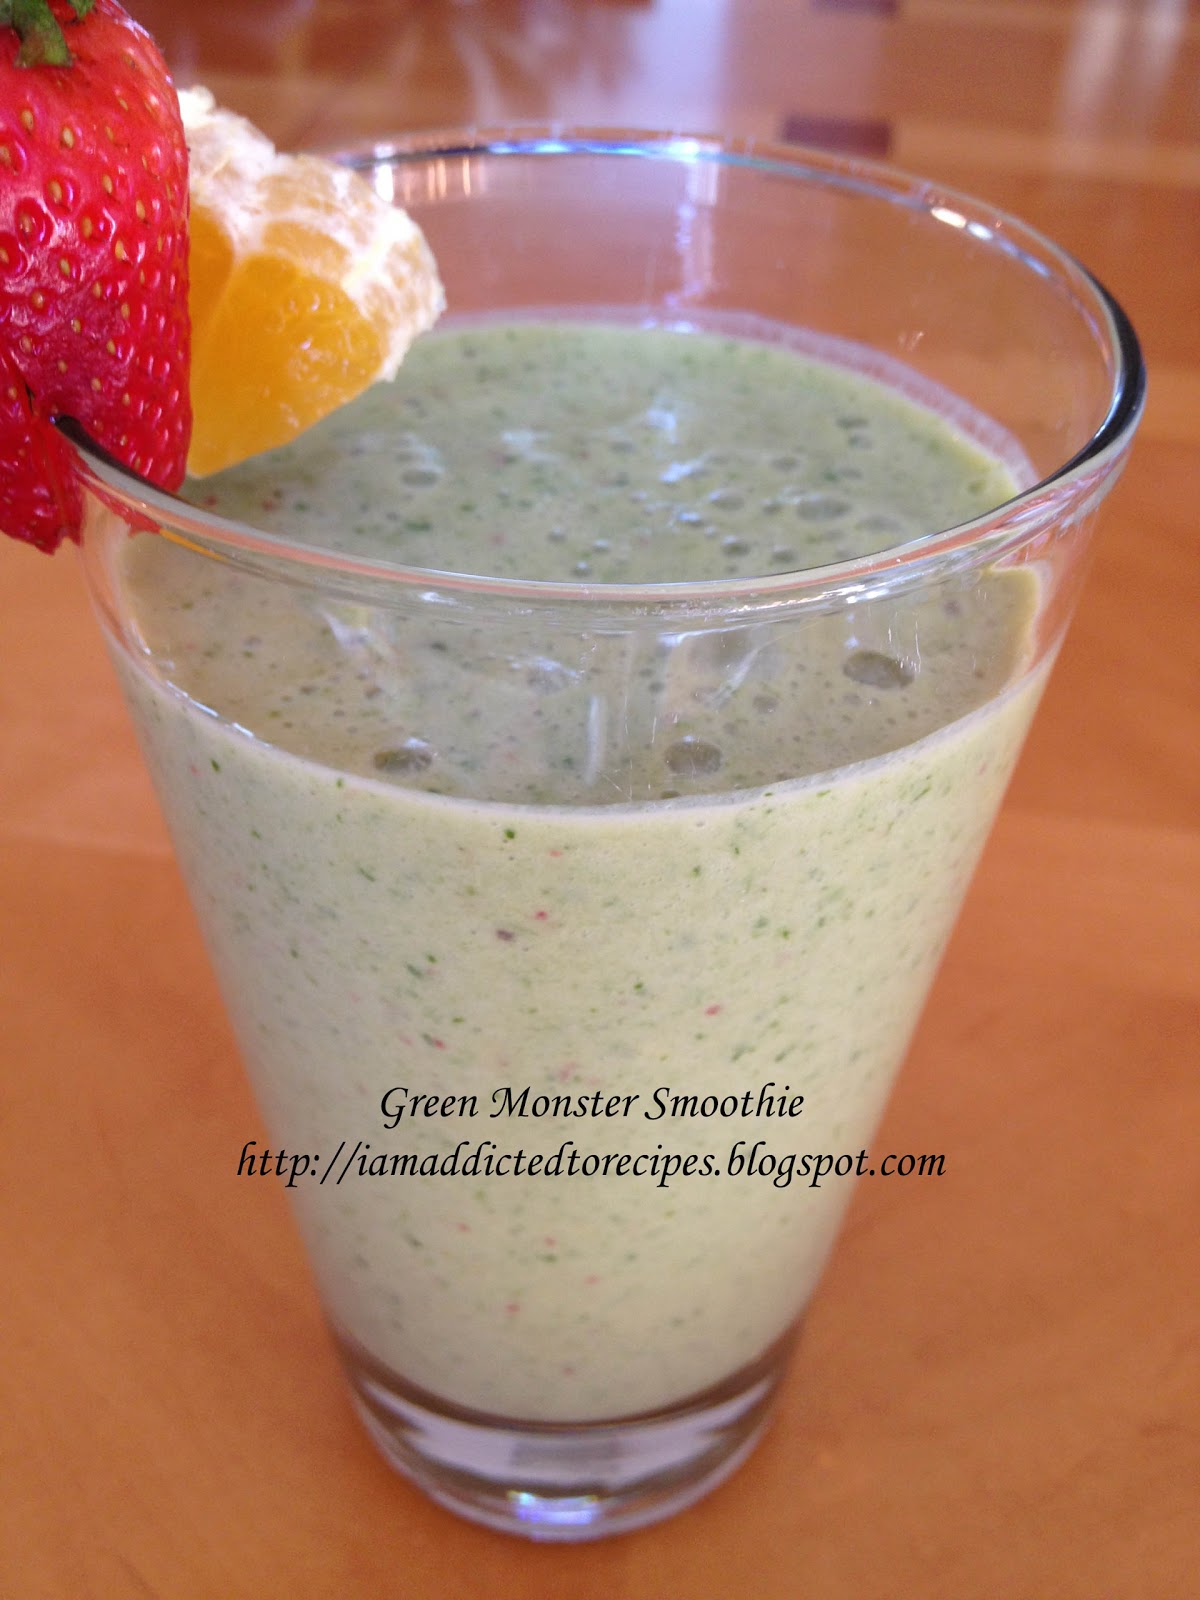 Addicted to Recipes: Green Monster Smoothie - Crazy Cooking Challenge